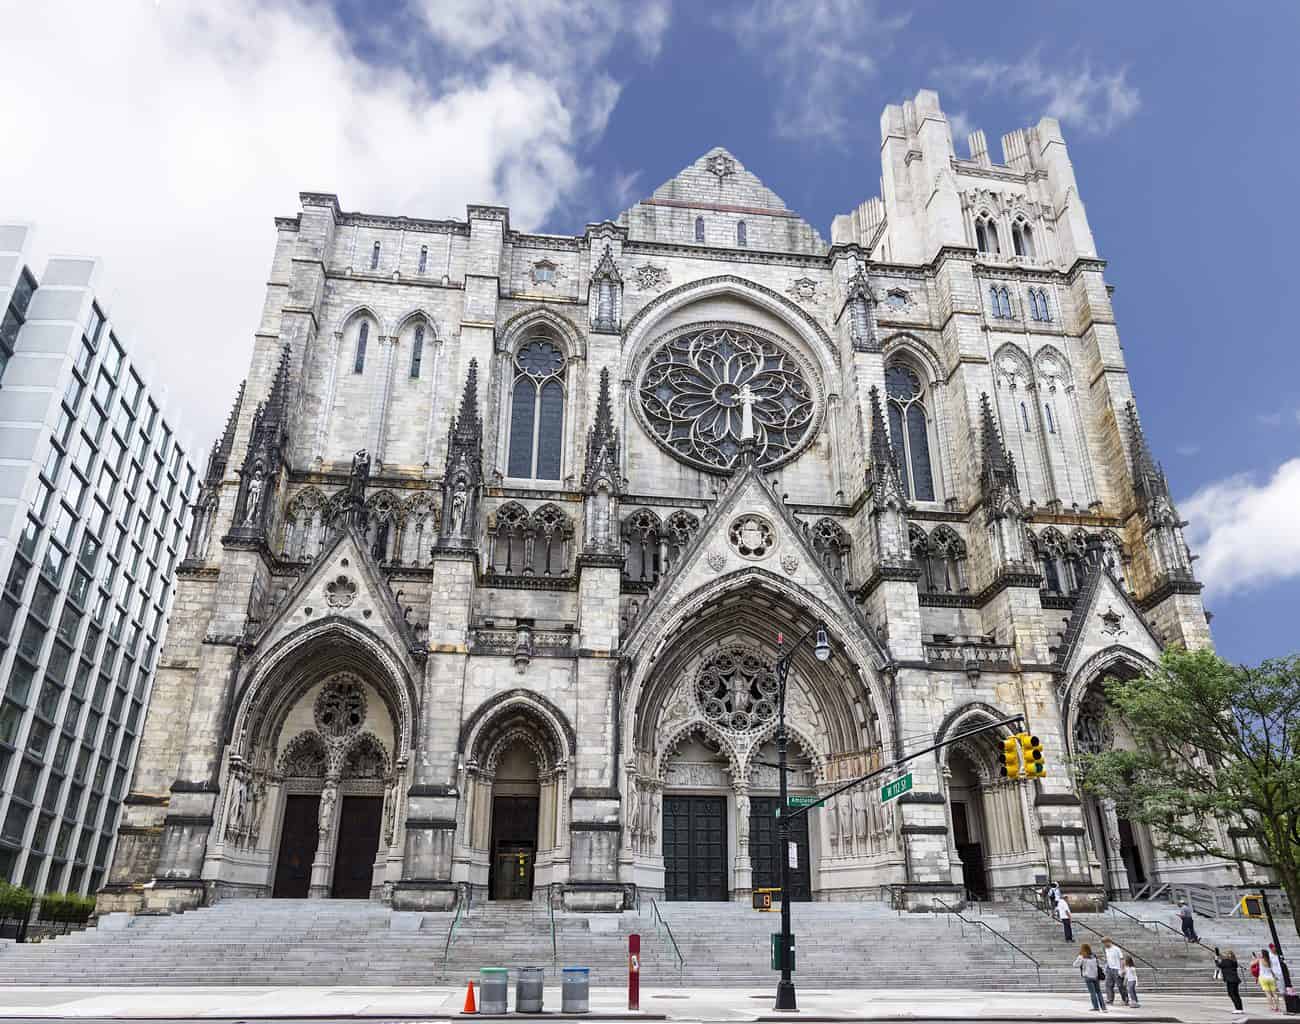 The stunning exterior of St. John the Divine. One of the best churches in NYC that is also famous for being the official, Episcopal Diocese of New York.